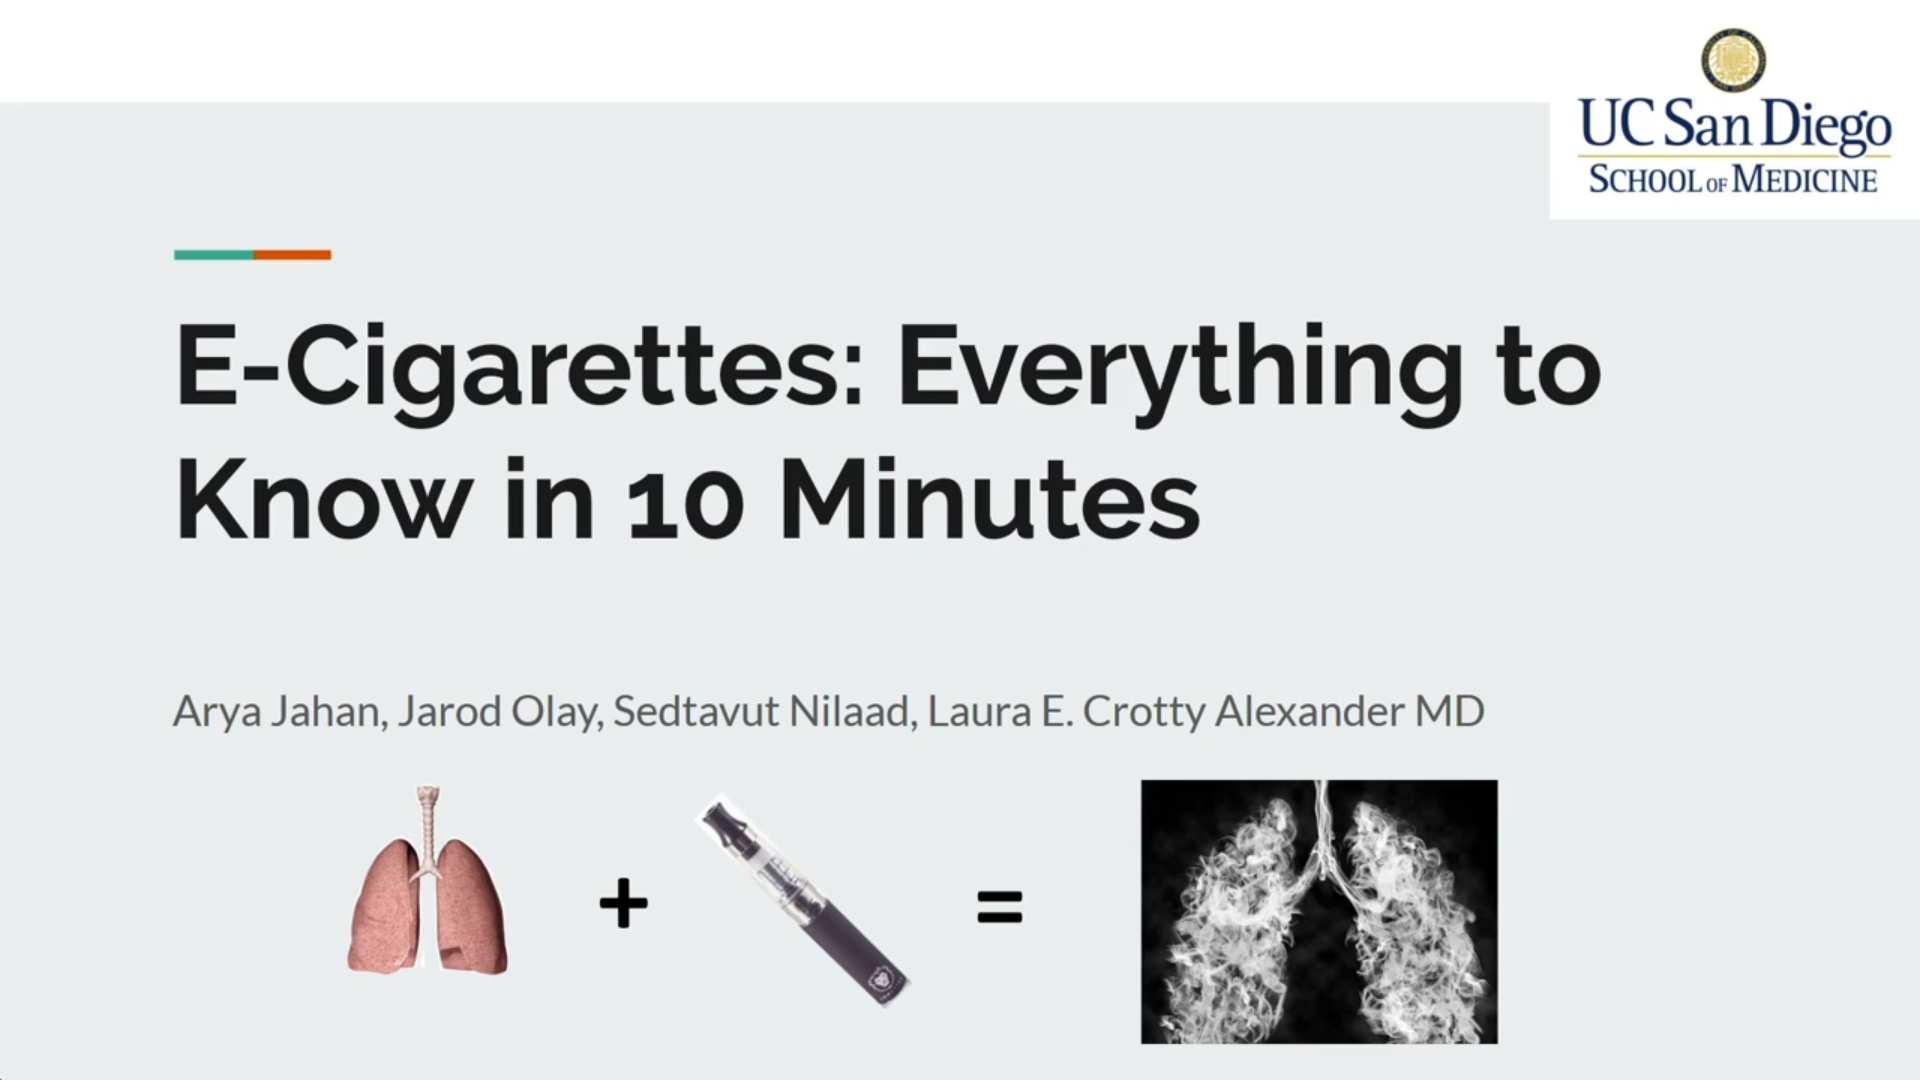 E-Cigarettes: Everything to Know in Under 10 Minutes